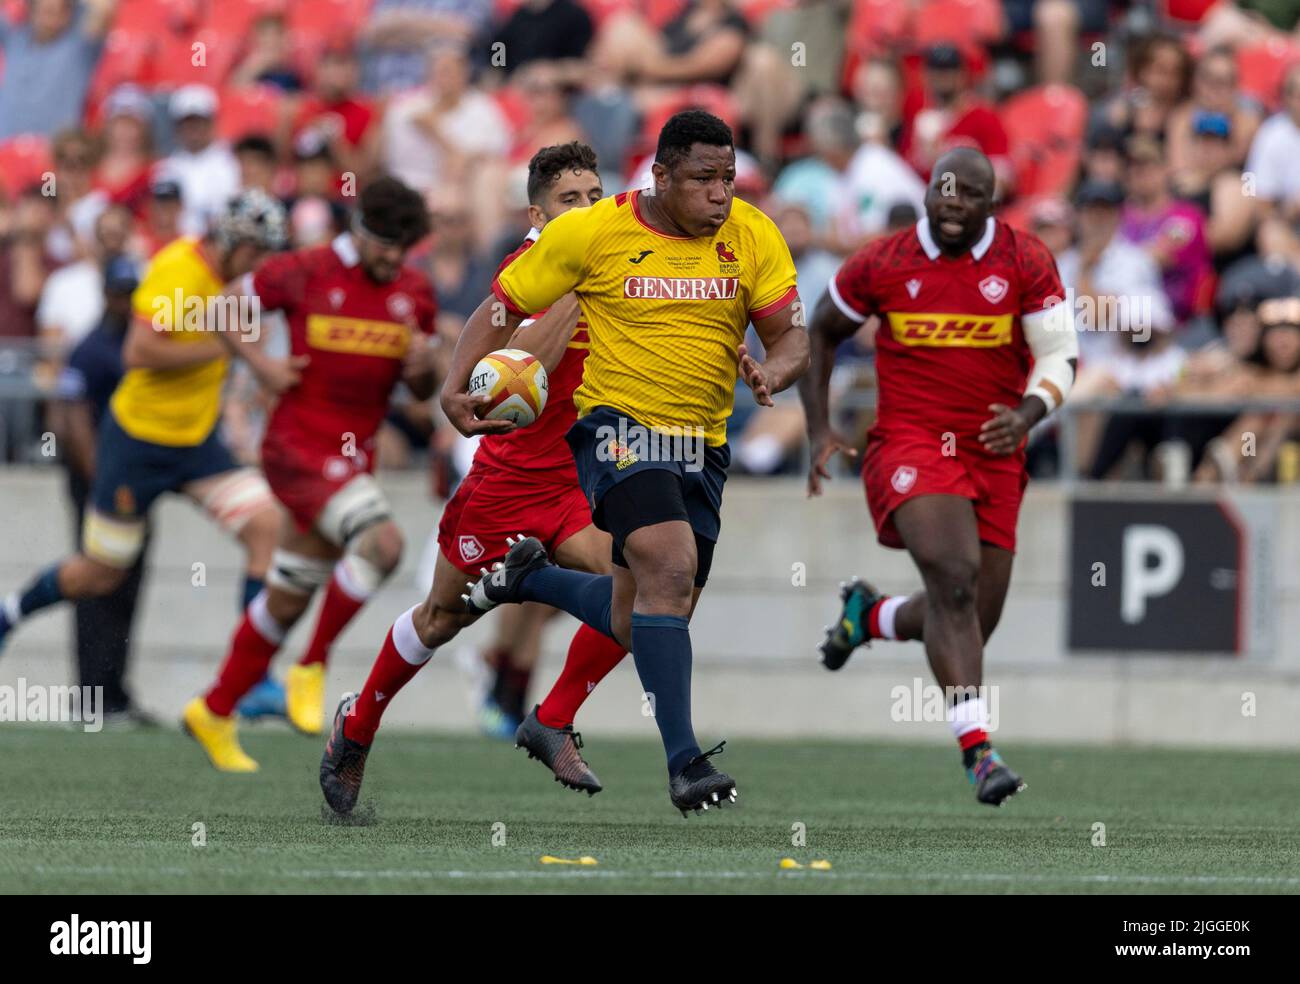 Ottawa, Canada. 10 Jul 2022. SANTIAGO OVEJERO (16) of Spain in the Spain at Canada Men’s World Rugby match played at TD Place Stadium in Ottawa, Canada. Spain won the game 57-34.. Credit: Sean Burges/Alamy Live News Stock Photo